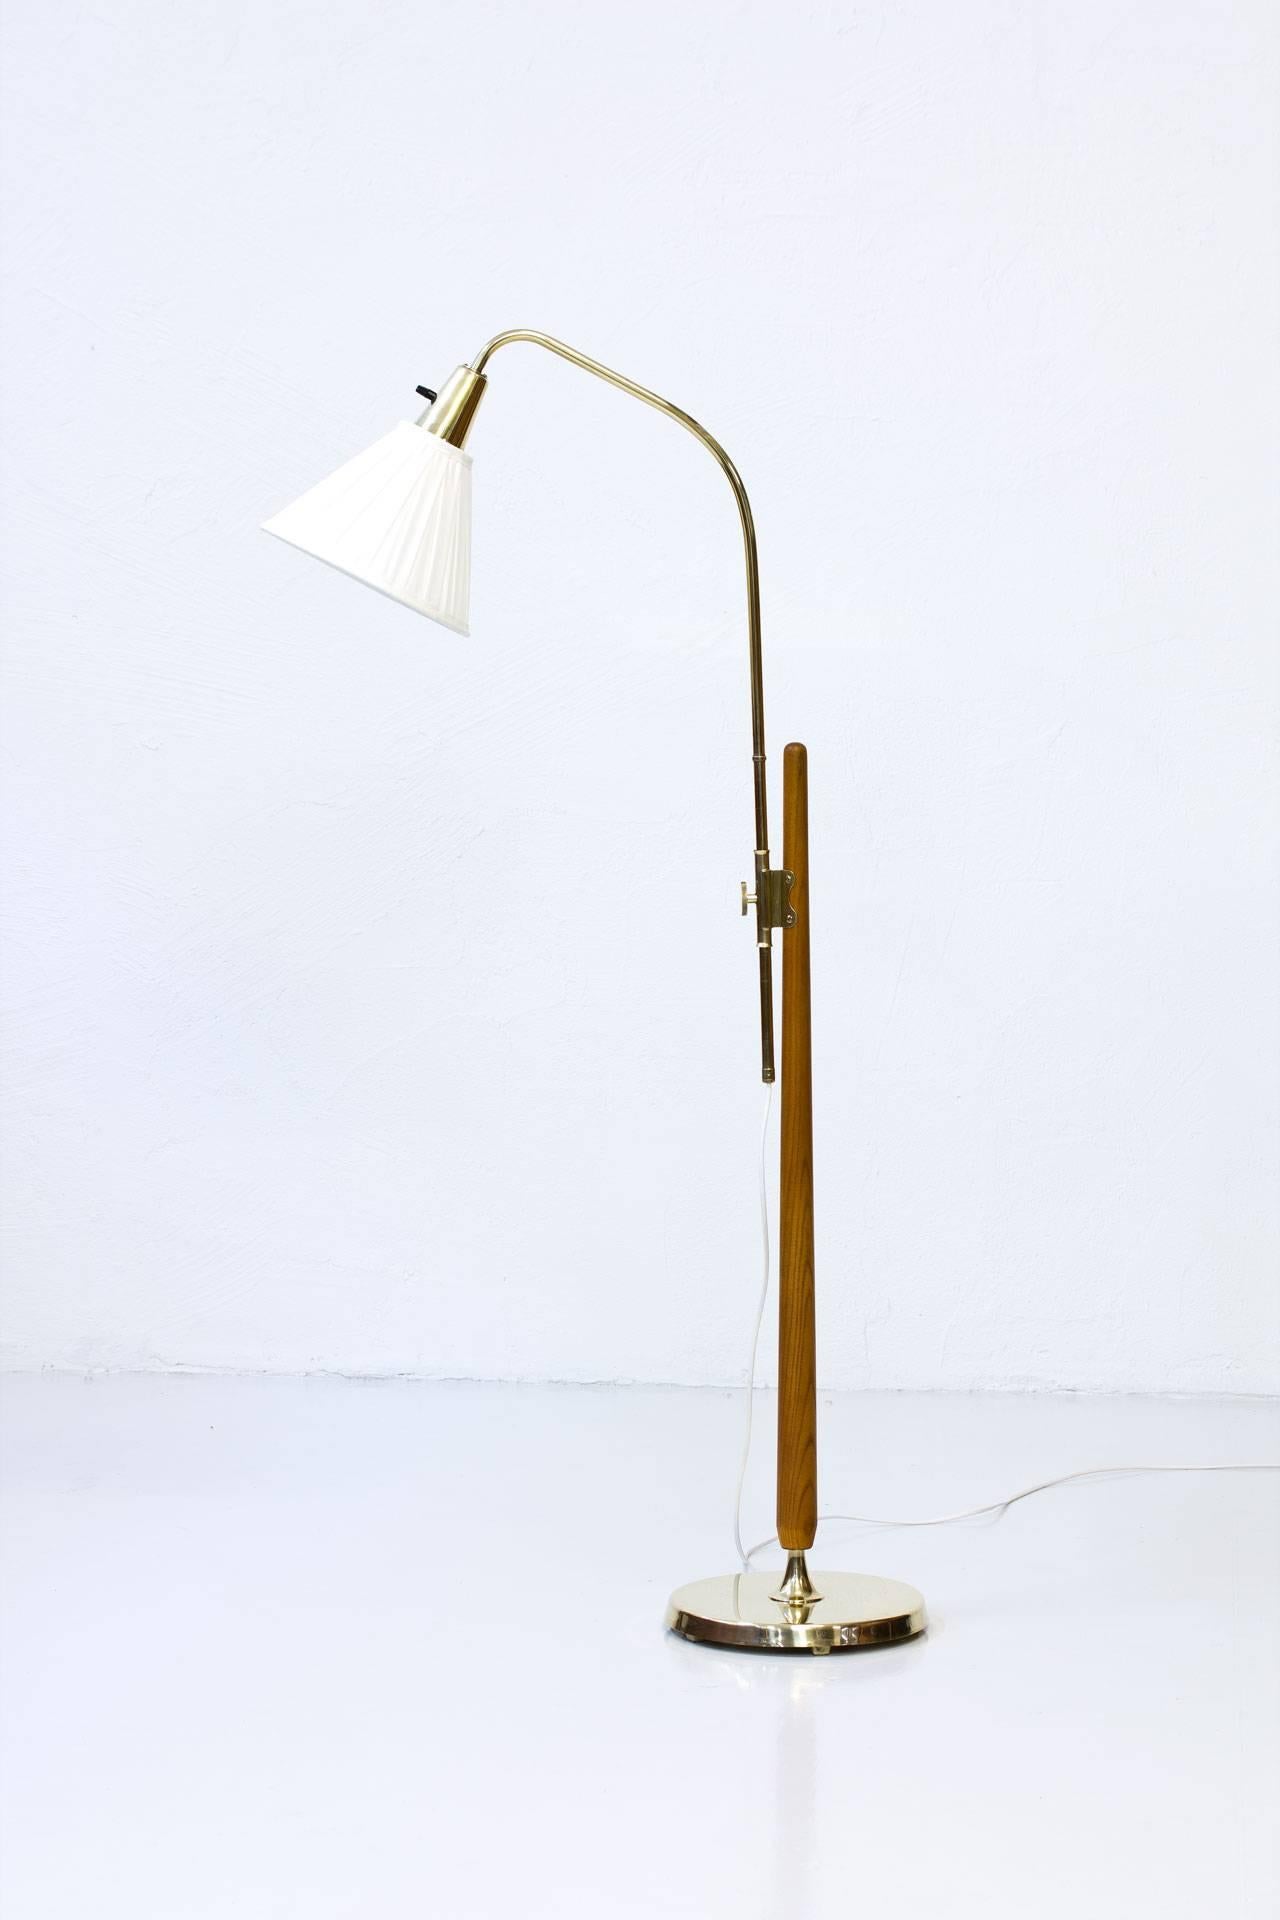 Rare floor lamp attributed to Hans Bergström. Produced by ASEA in Sweden during the 1950s. Oak stem with polished brass base and adjustable arm. Rewired. New hand sewn, off – white
pleated chintz fabric shade. Excellent condition with light patina